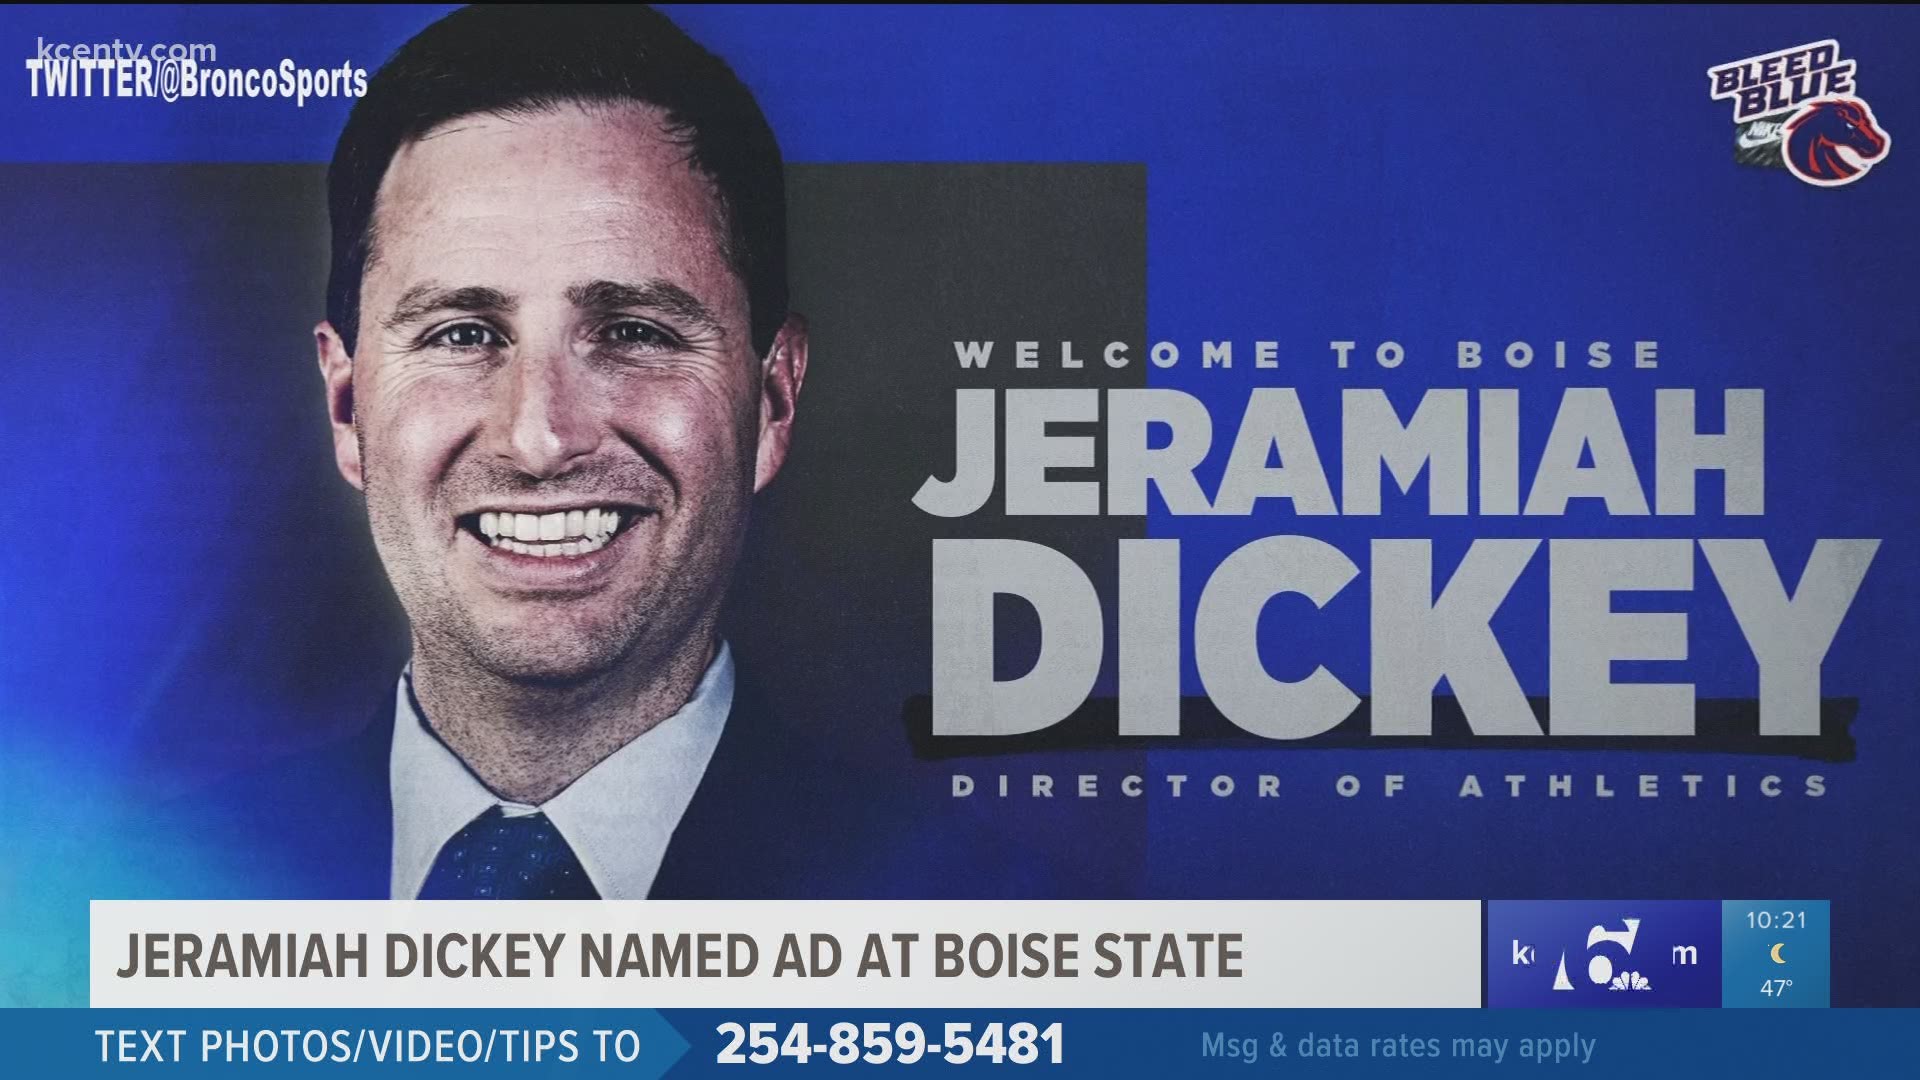 Dickey started with Baylor University in 2017 and is now headed to Idaho to lead Boise State's athletic department.